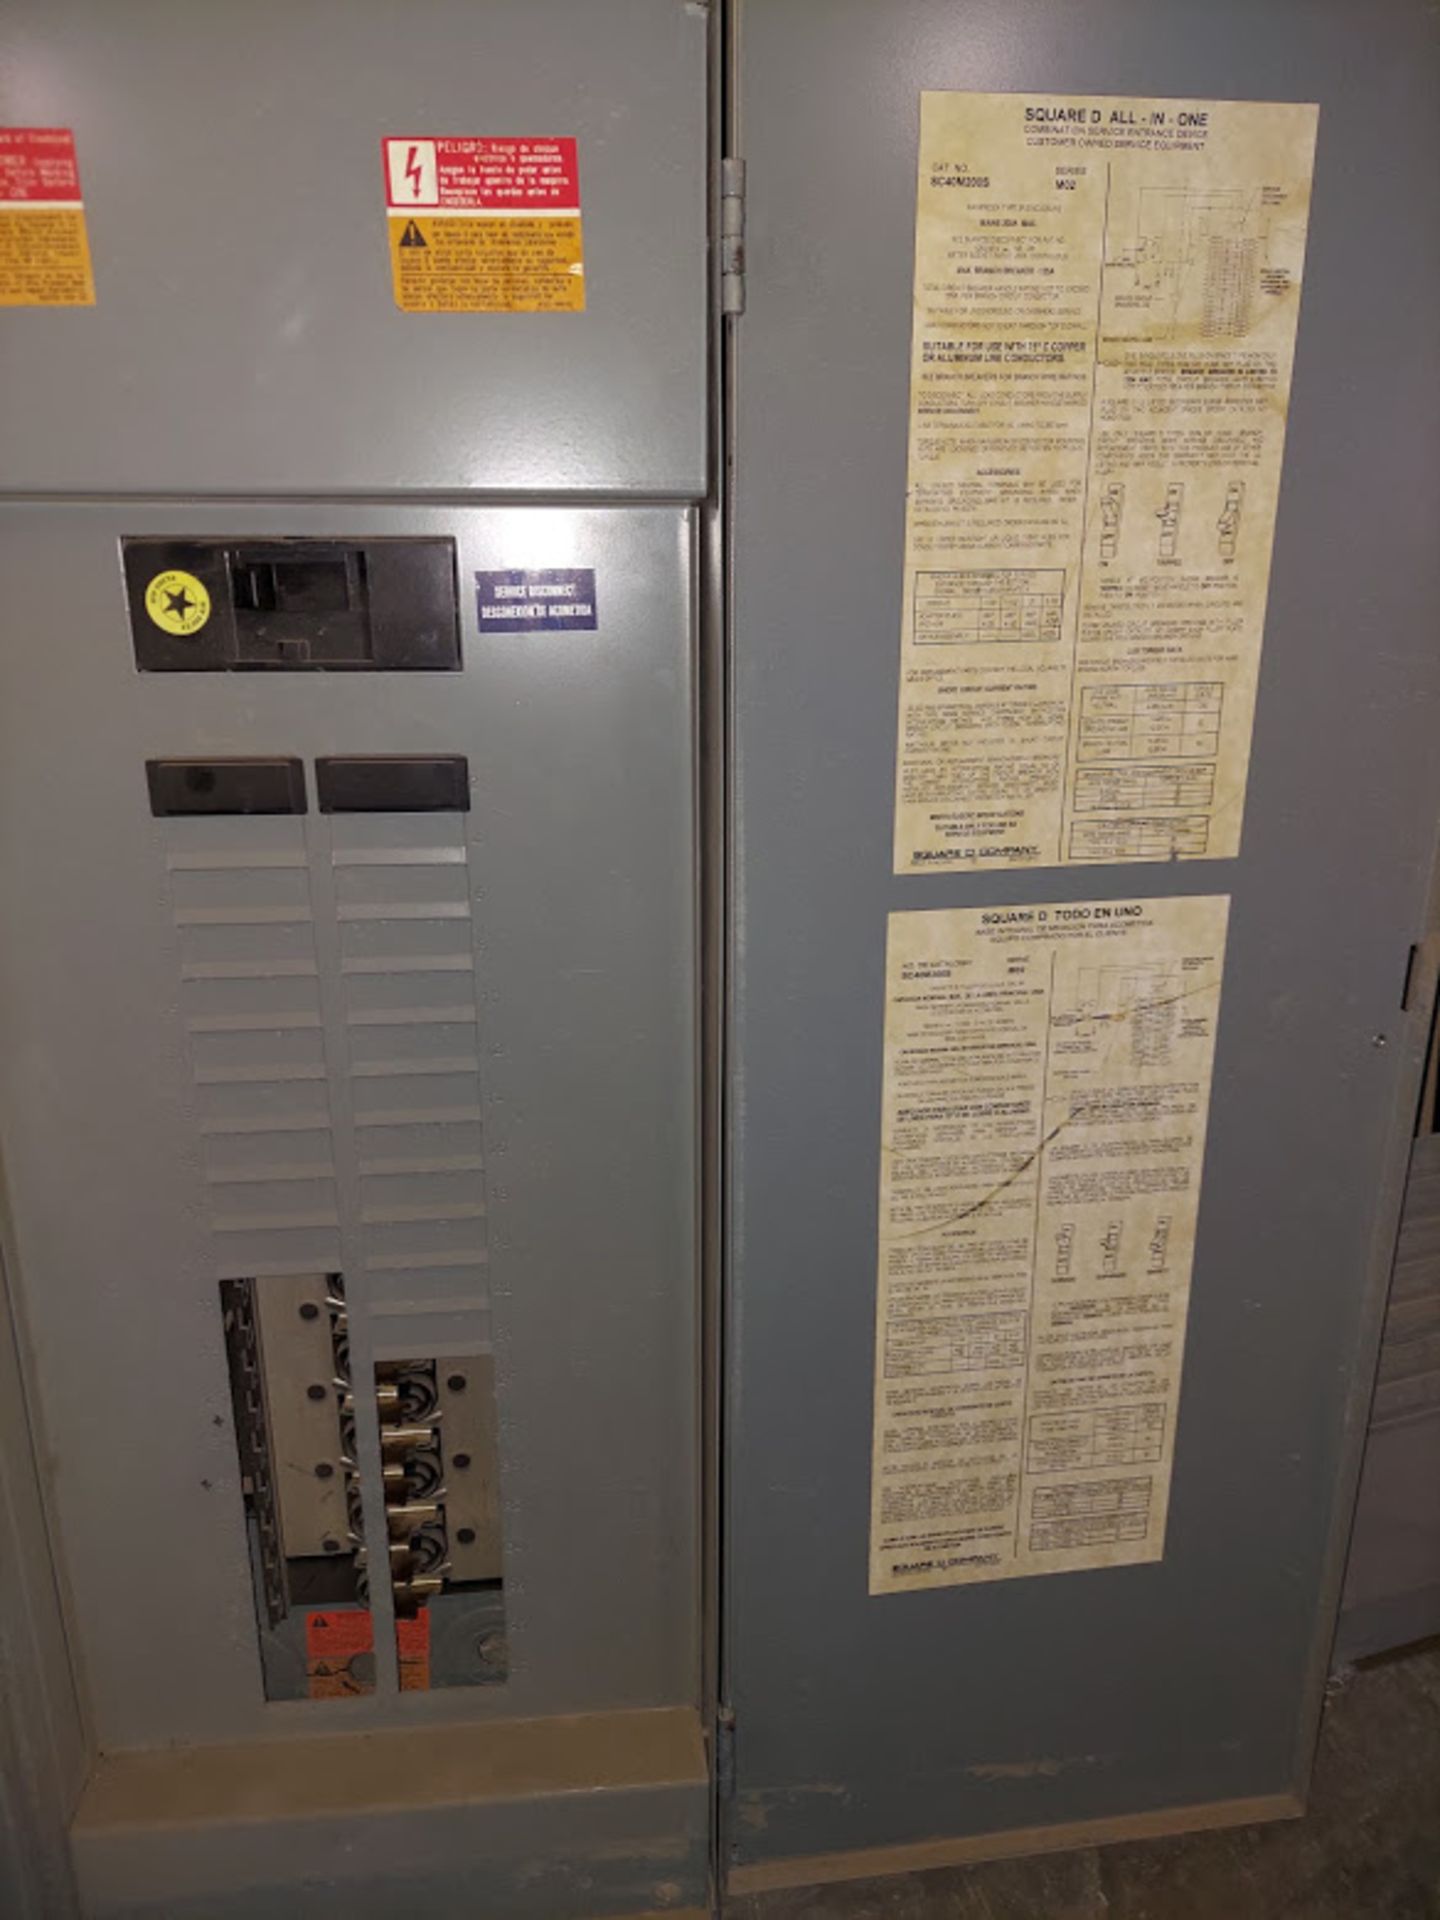 2 -Square D Electrical Service Panels - Image 2 of 3